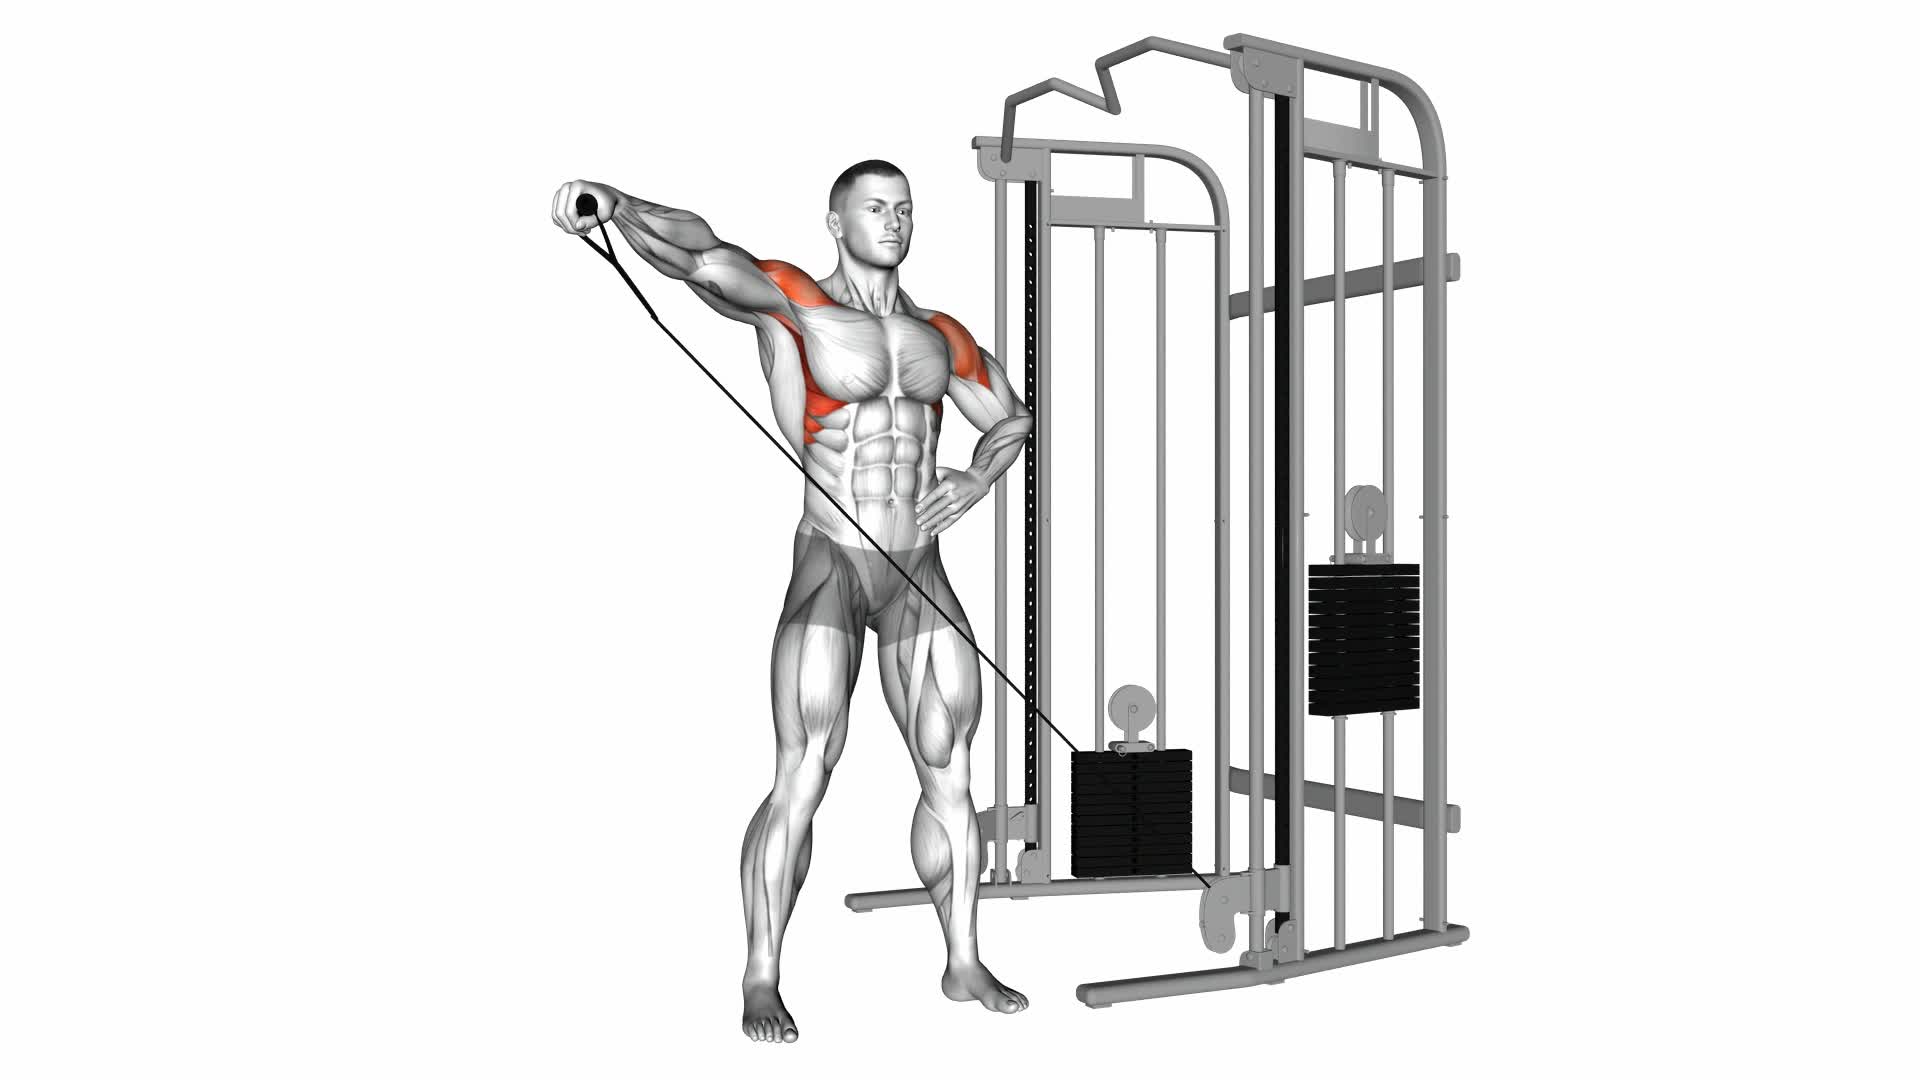 Cable One Arm Lateral Raise - Video Exercise Guide & Tips